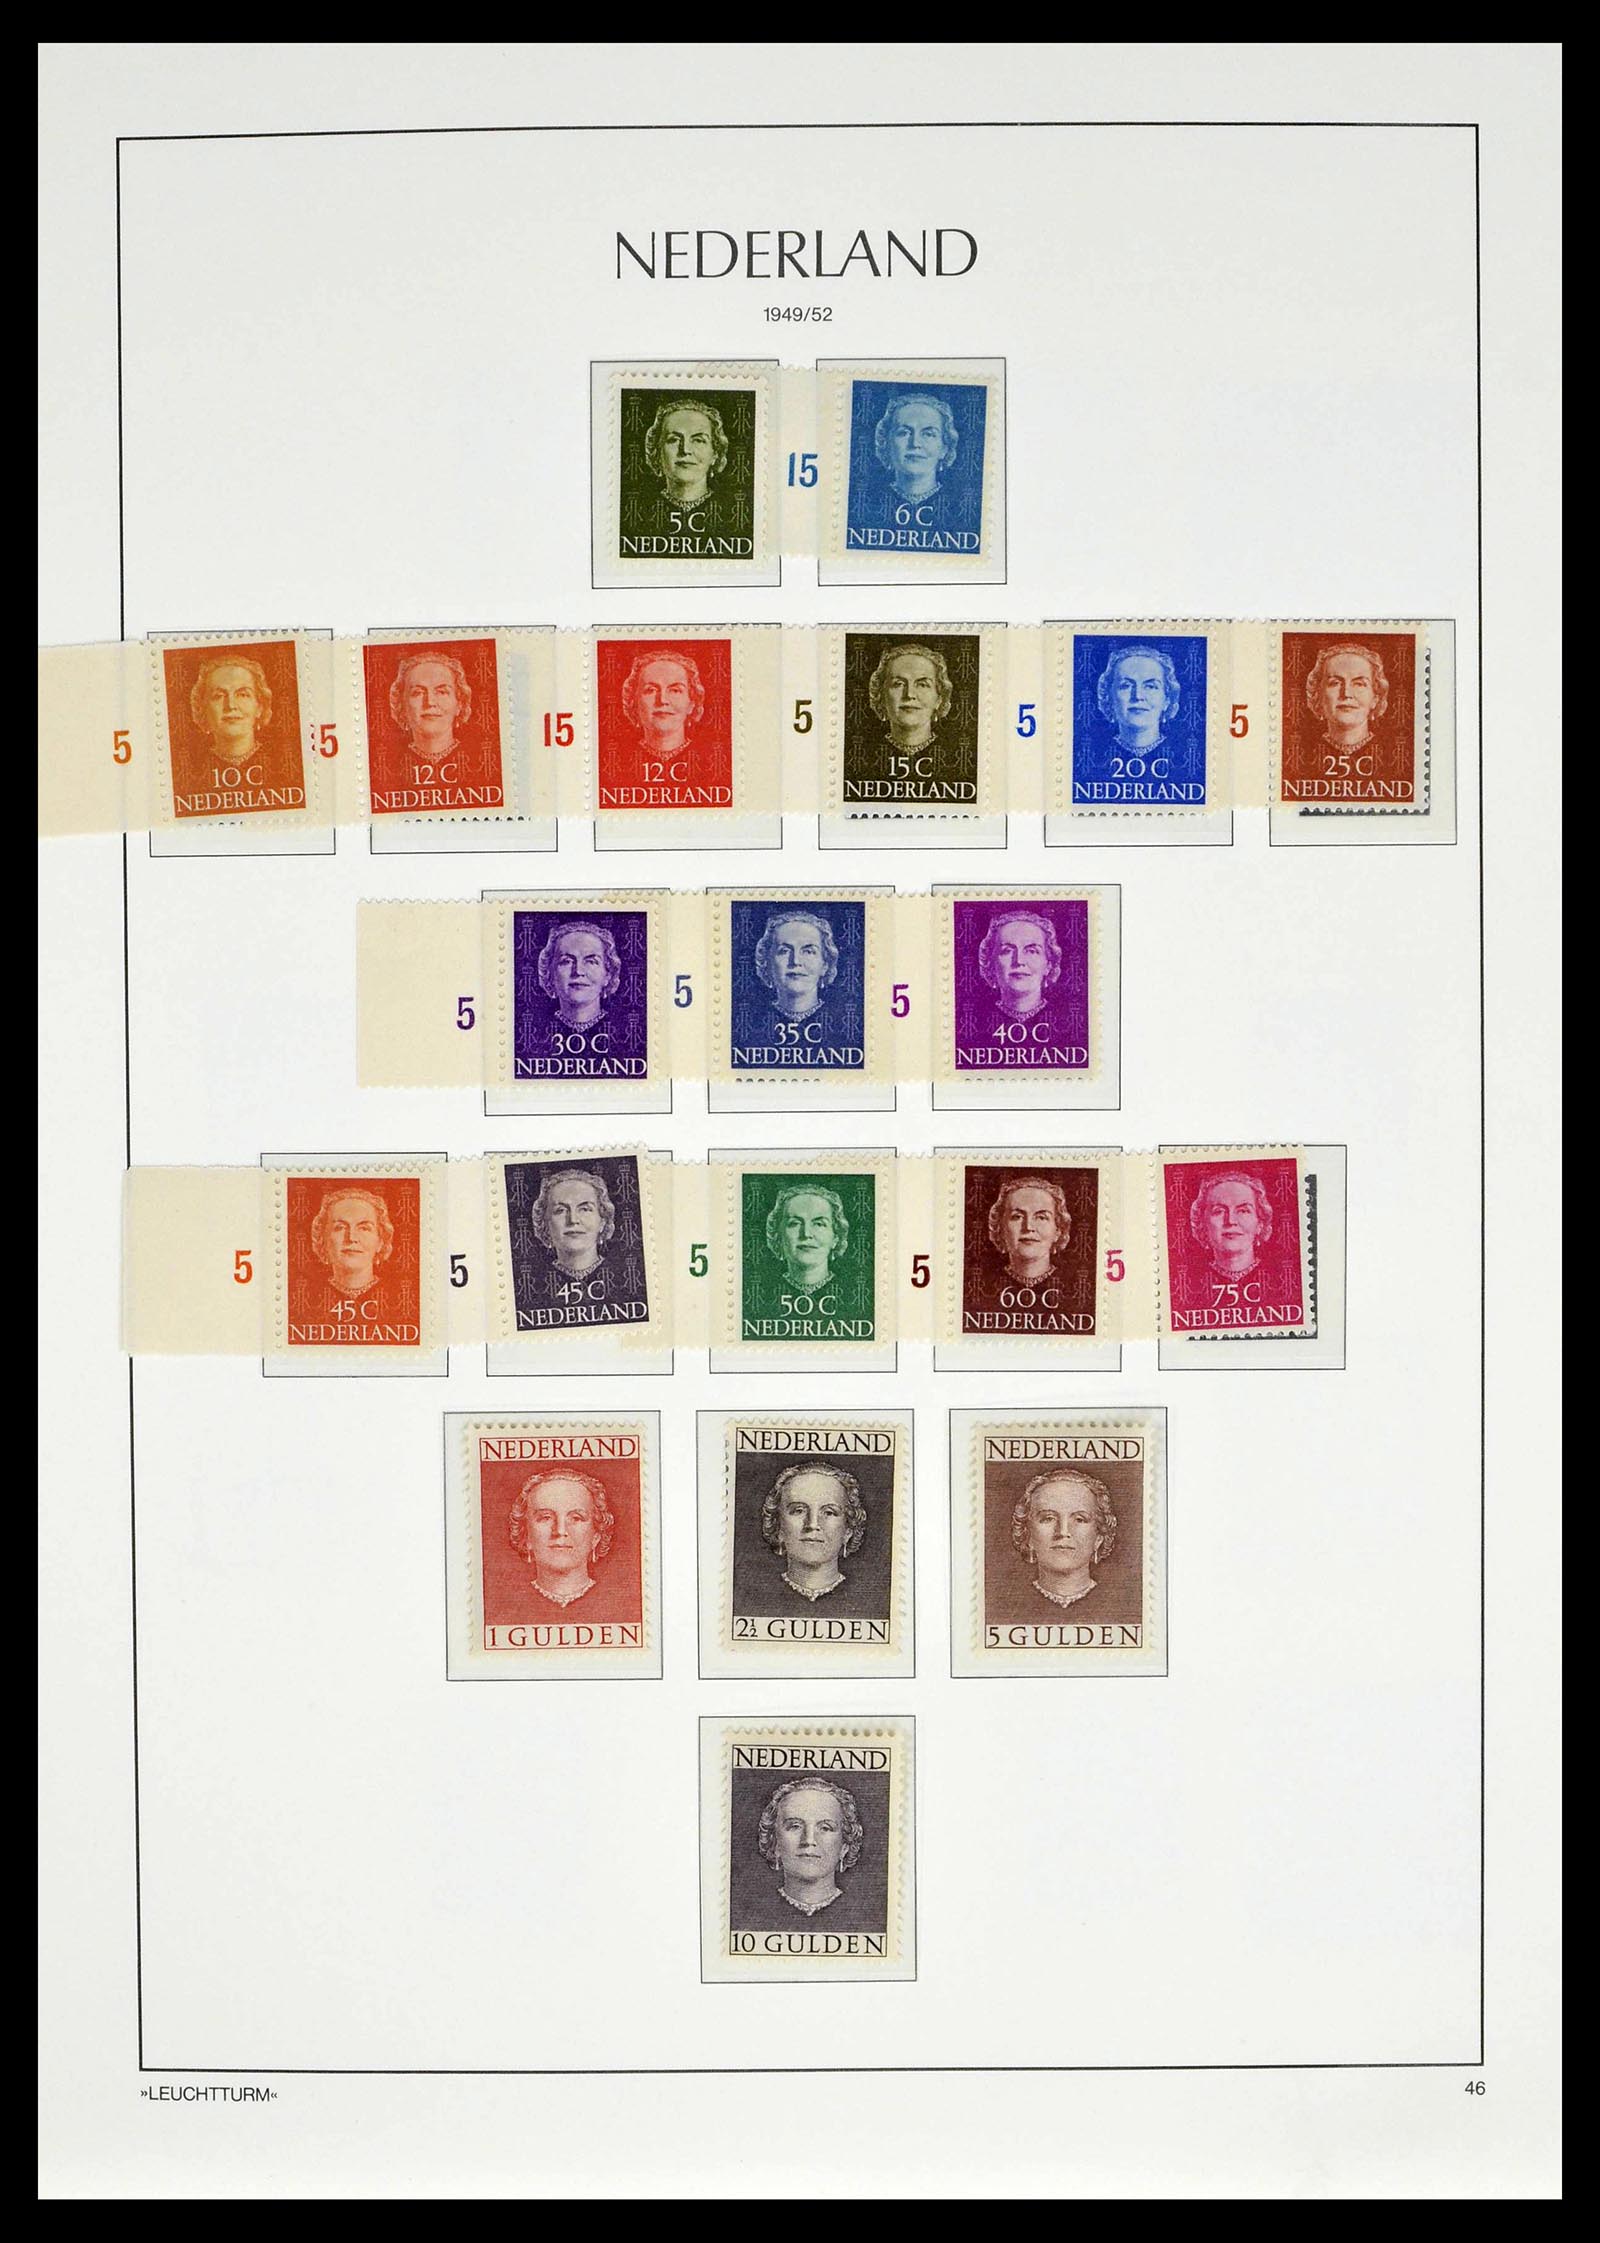 39135 0070 - Stamp collection 39135 Netherlands 1852-1969.